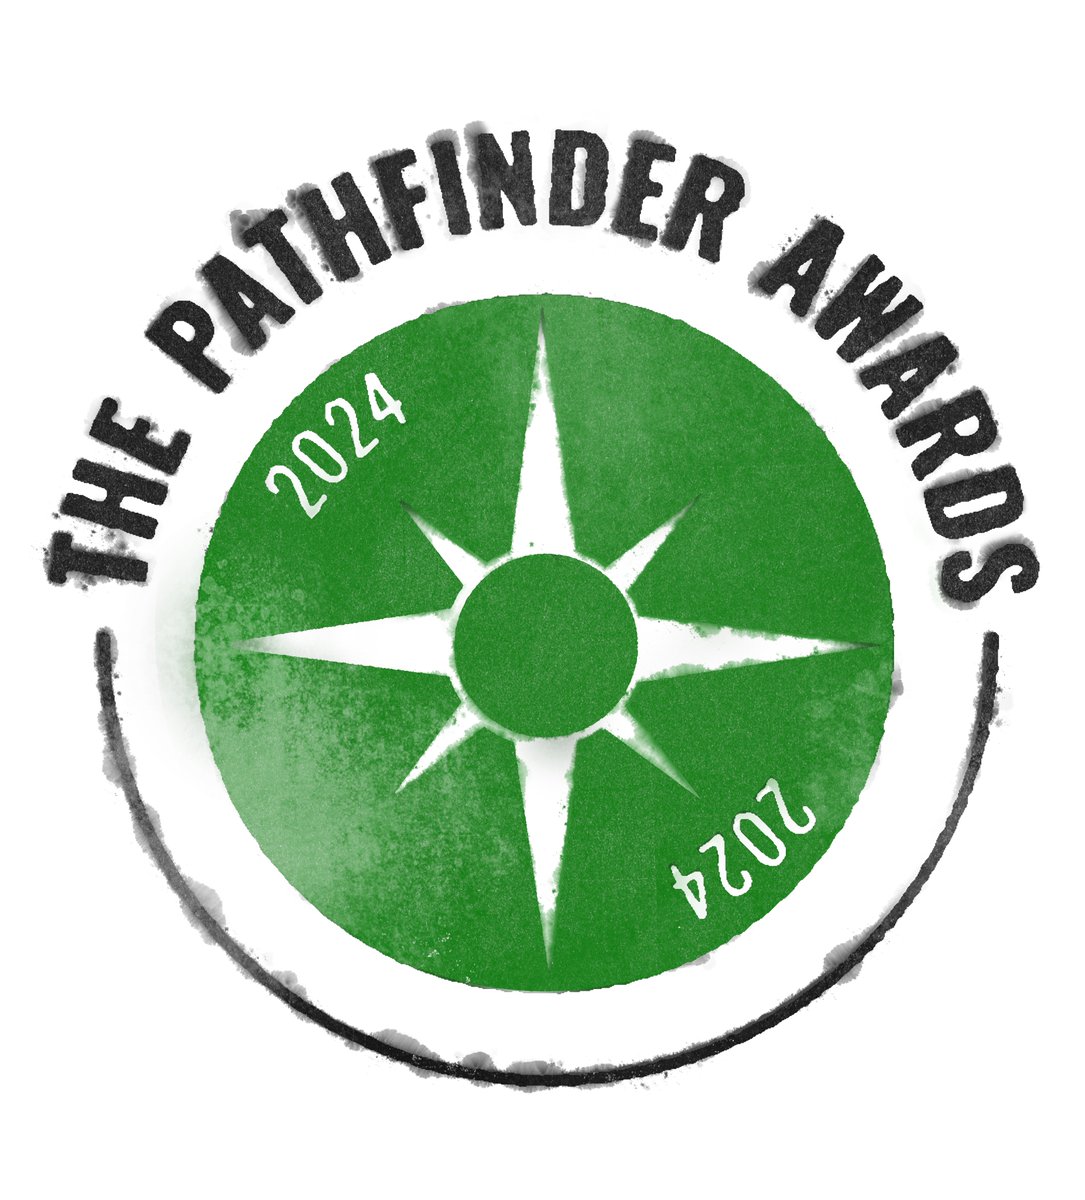 📣 Applications are open for the Unicorn Kingdom: Pathfinder Awards 🚀 🇬🇧is looking for tech scale-ups in AI, Cyber Security, CAM Technology and Digital Trade Solutions that are ready to go🌍 Deadline to apply: Tuesday 30 April To learn more visit 👉 great.gov.uk/ukpa